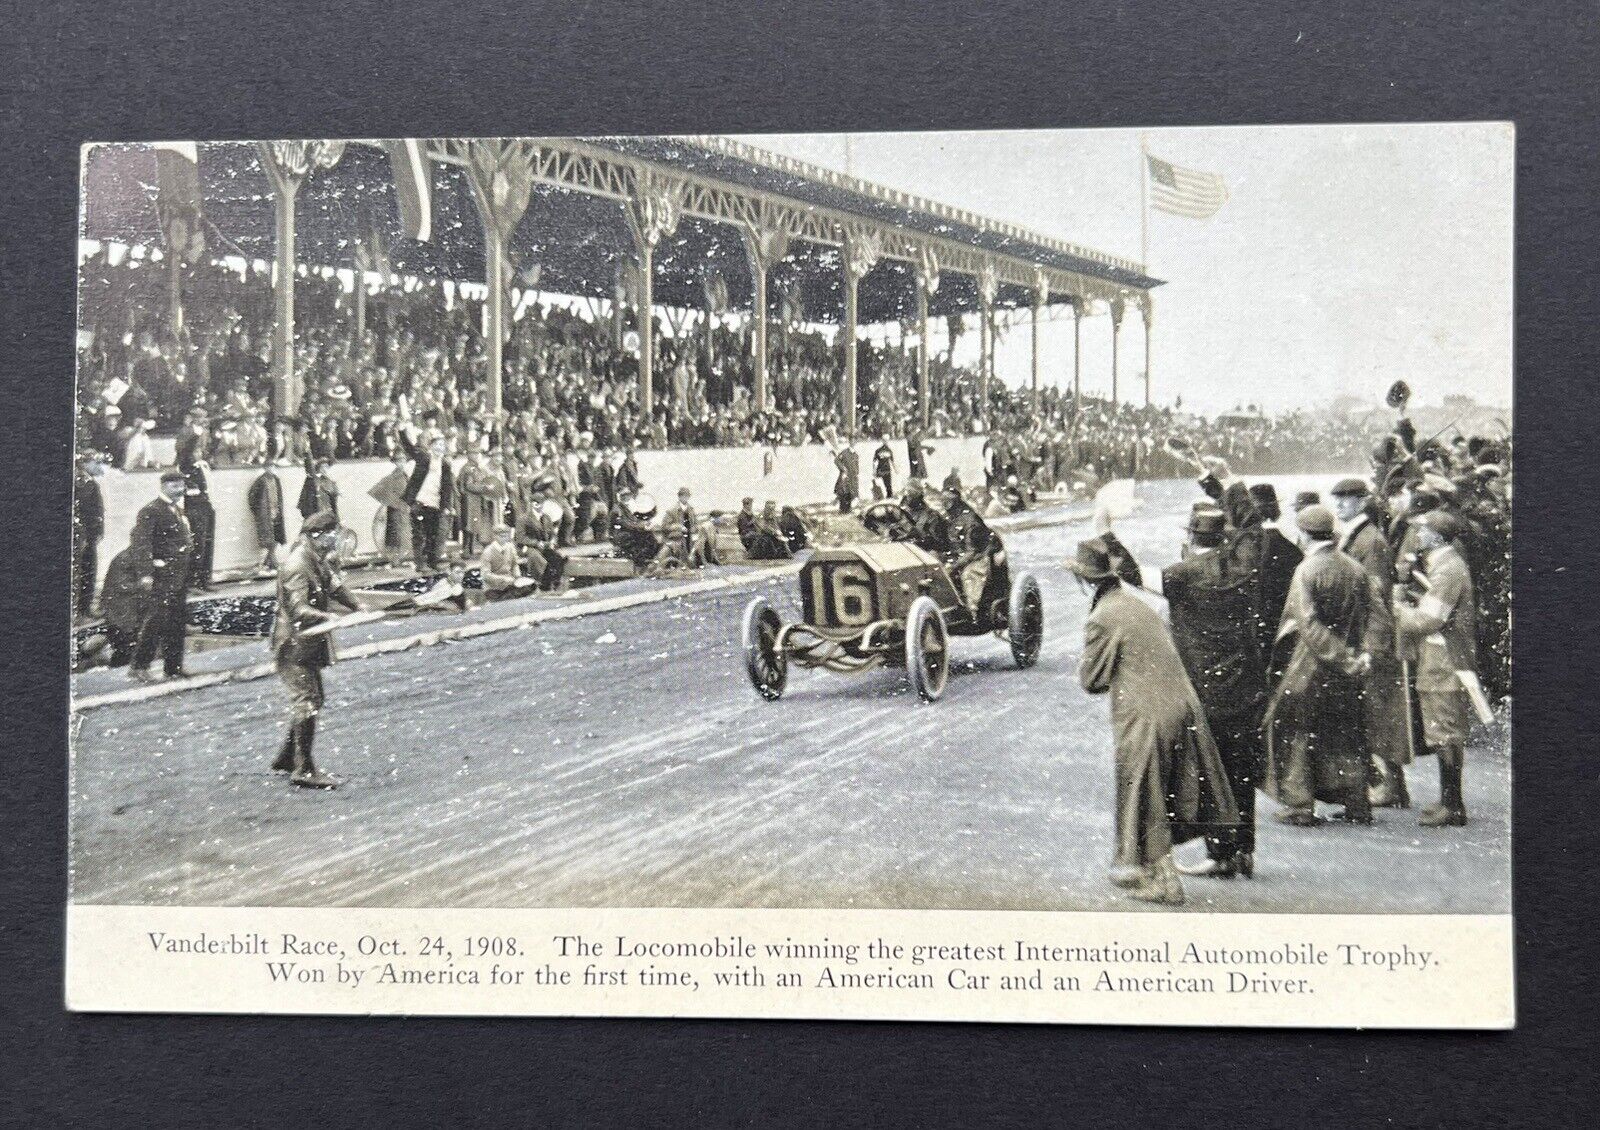 1908 Vanderbilt Cup Race Postcard/ The Most Important Win In Auto Racing History